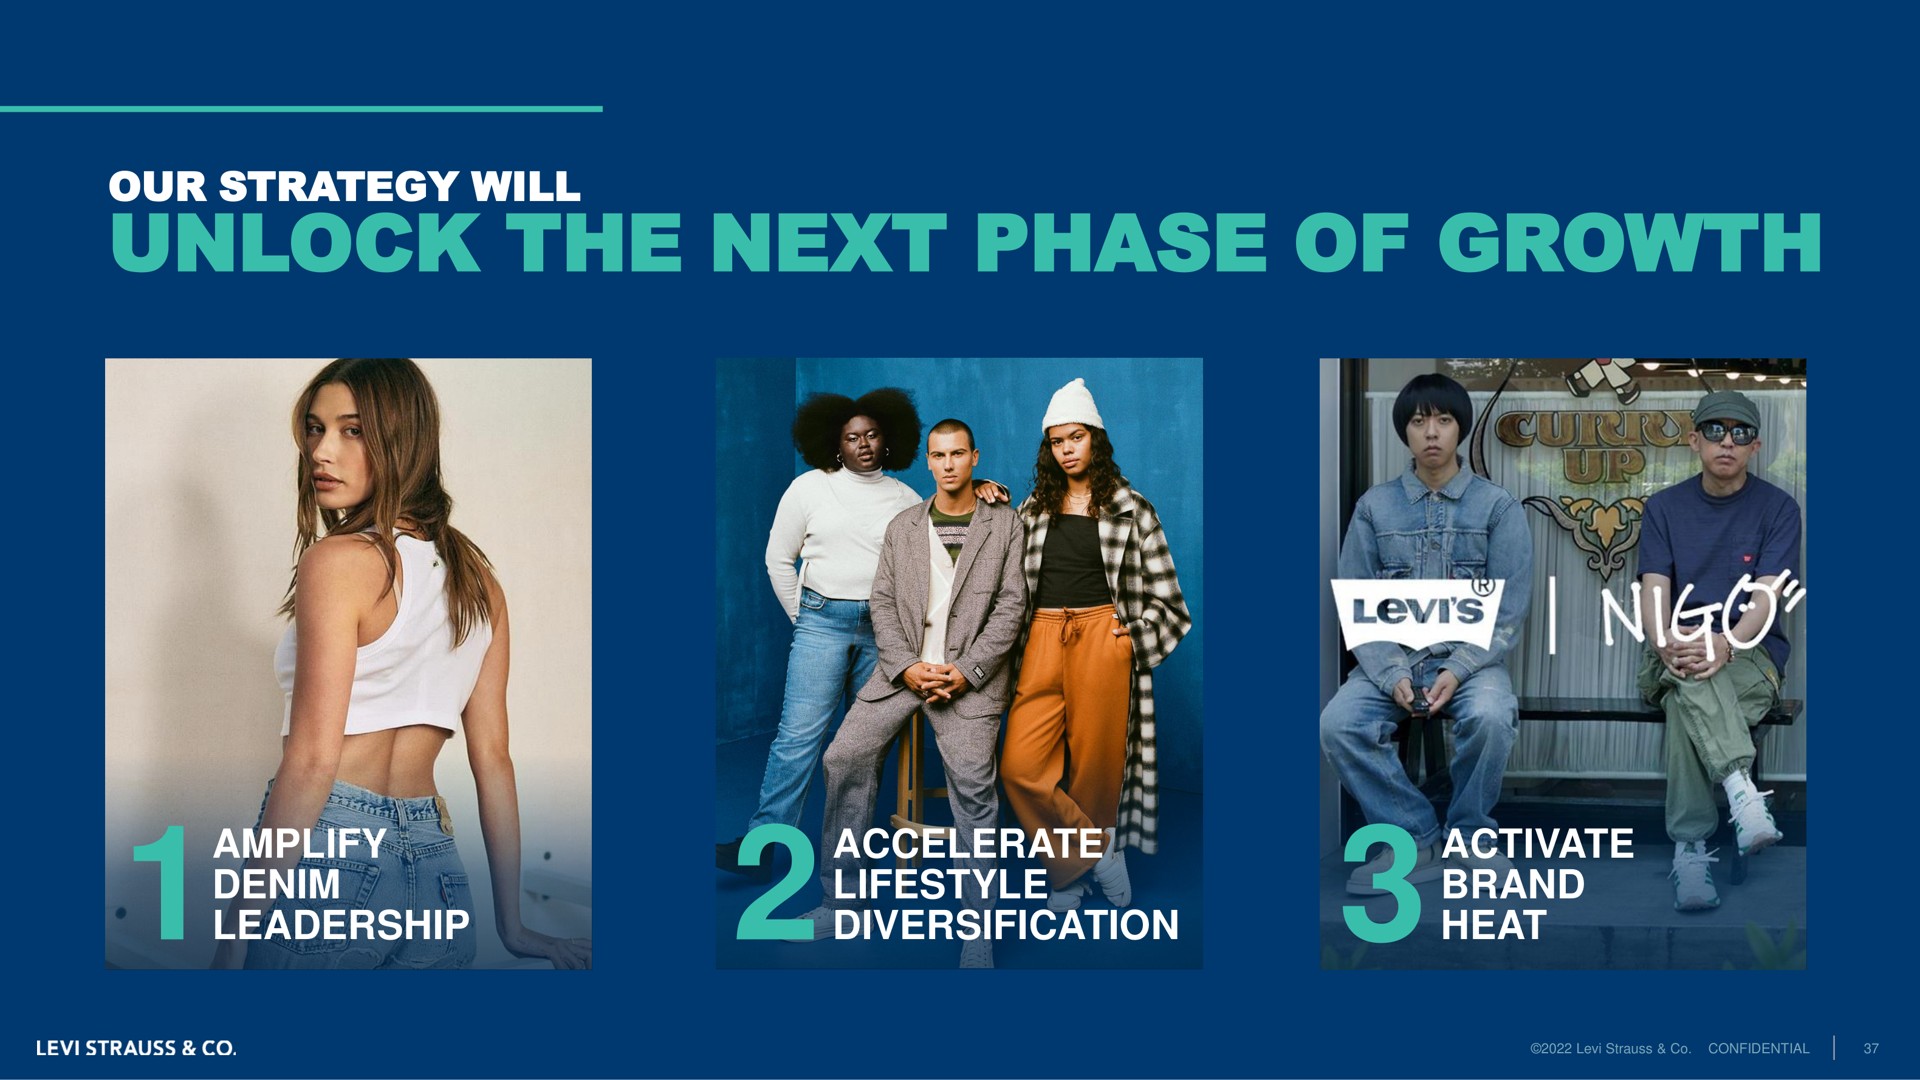 our strategy will unlock the next phase of growth amplify denim leadership accelerate diversification activate brand heat an i | Levi Strauss